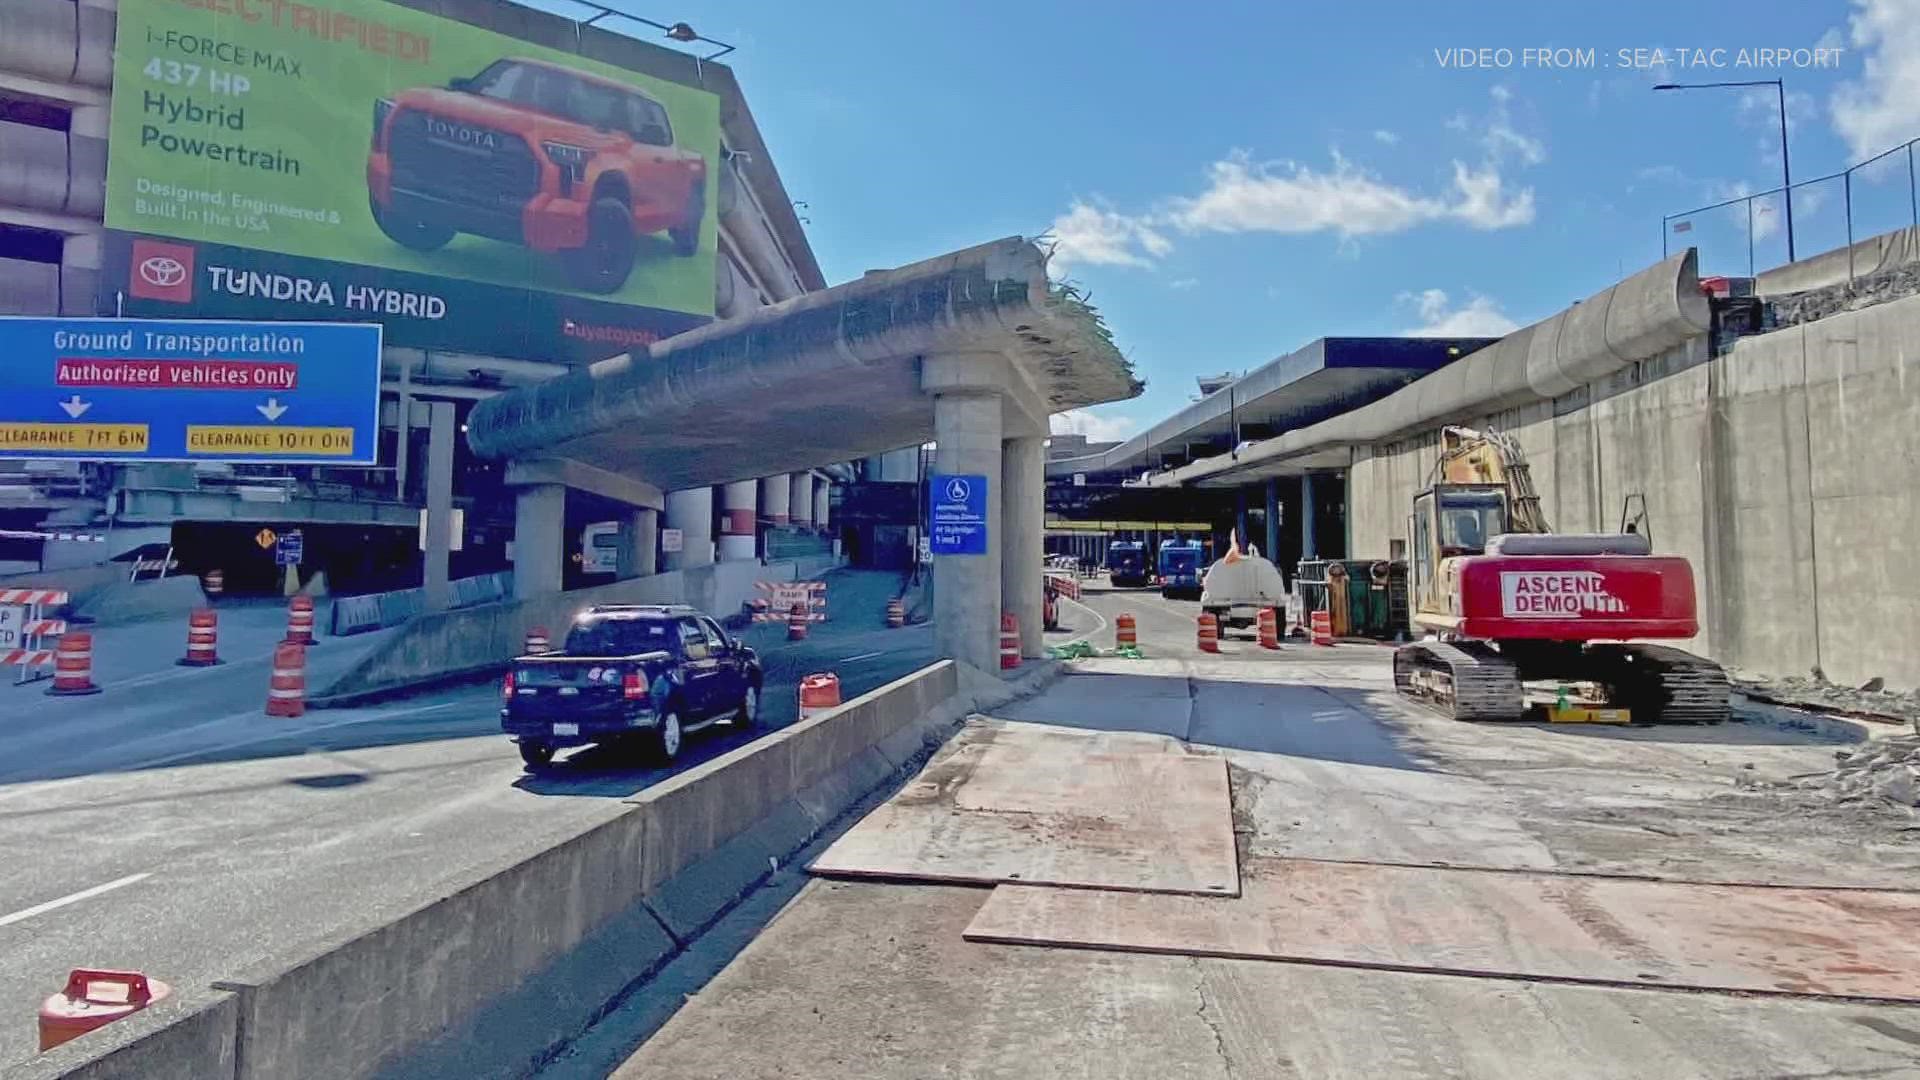 Crews will demolish a ramp at Sea-Tac overnight Monday. Here's what you need to know.